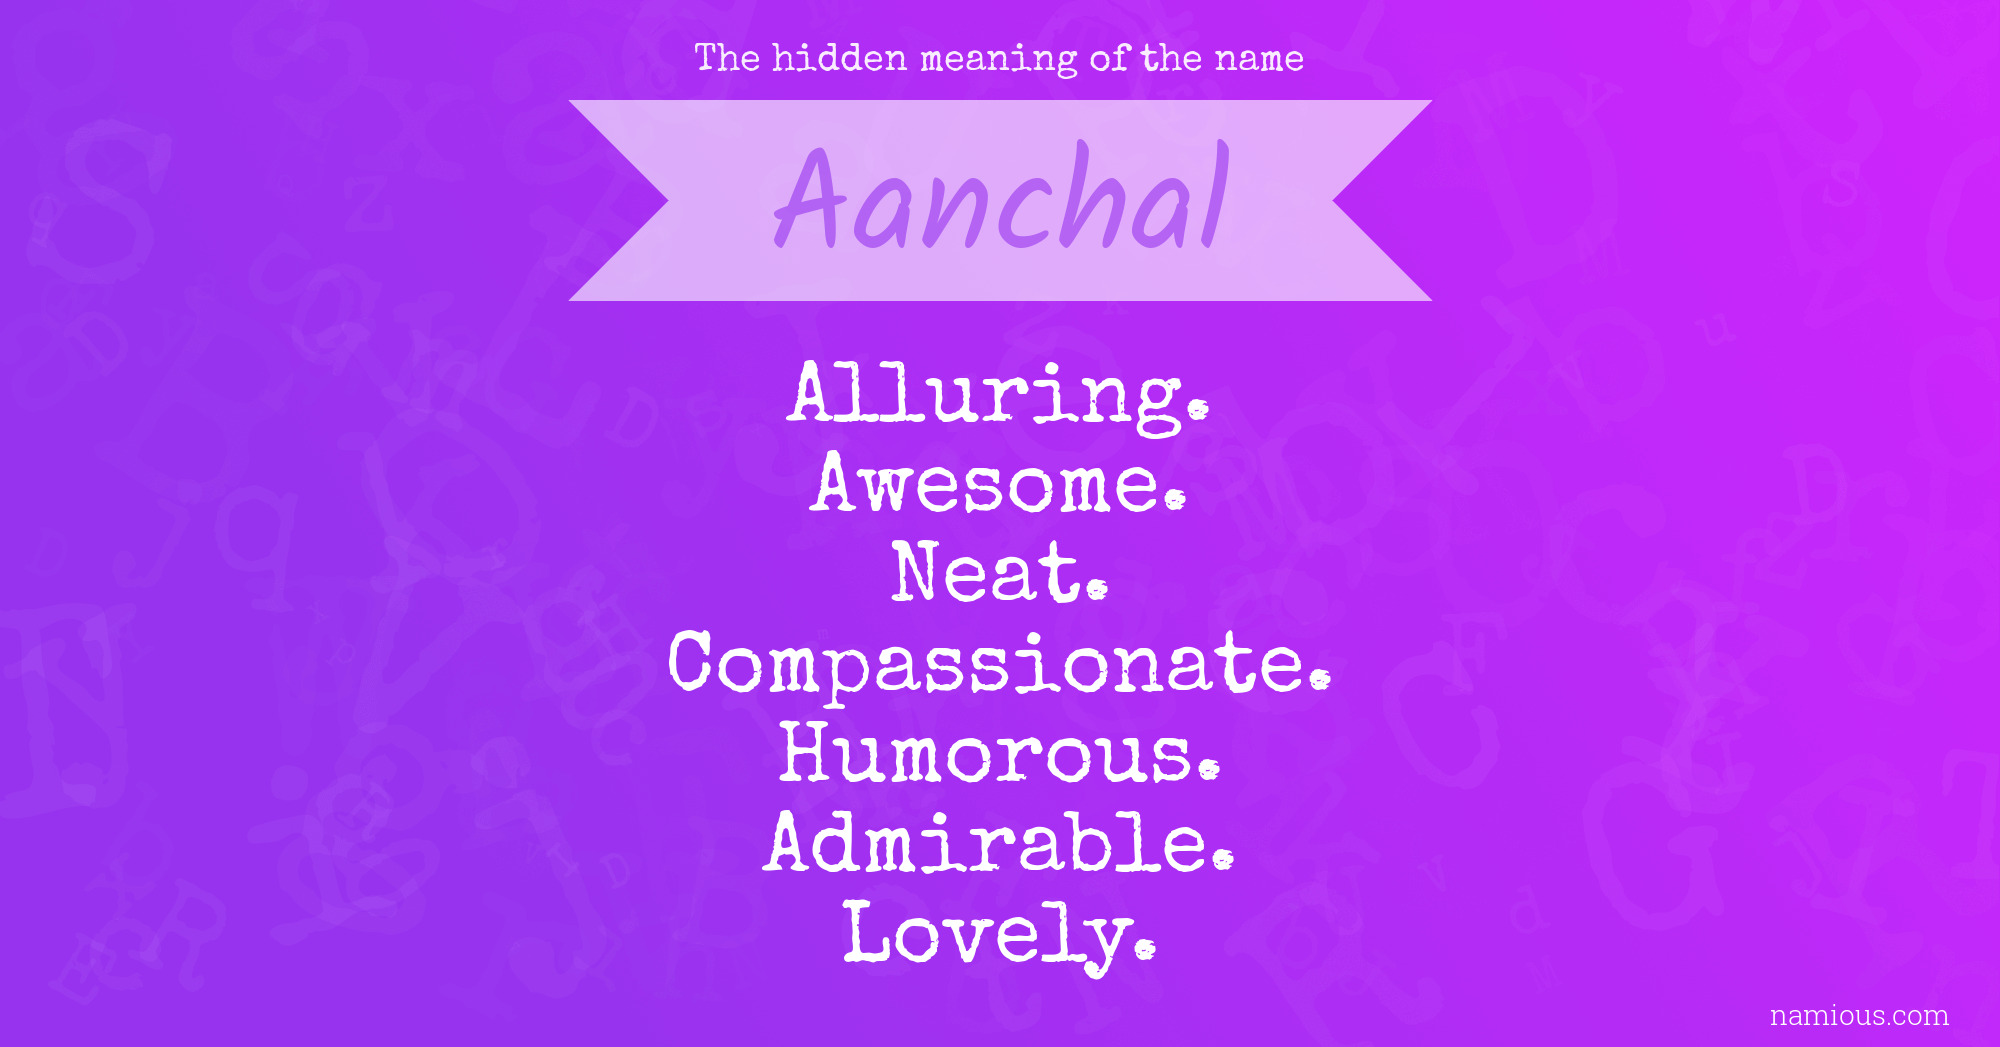 The hidden meaning of the name Aanchal